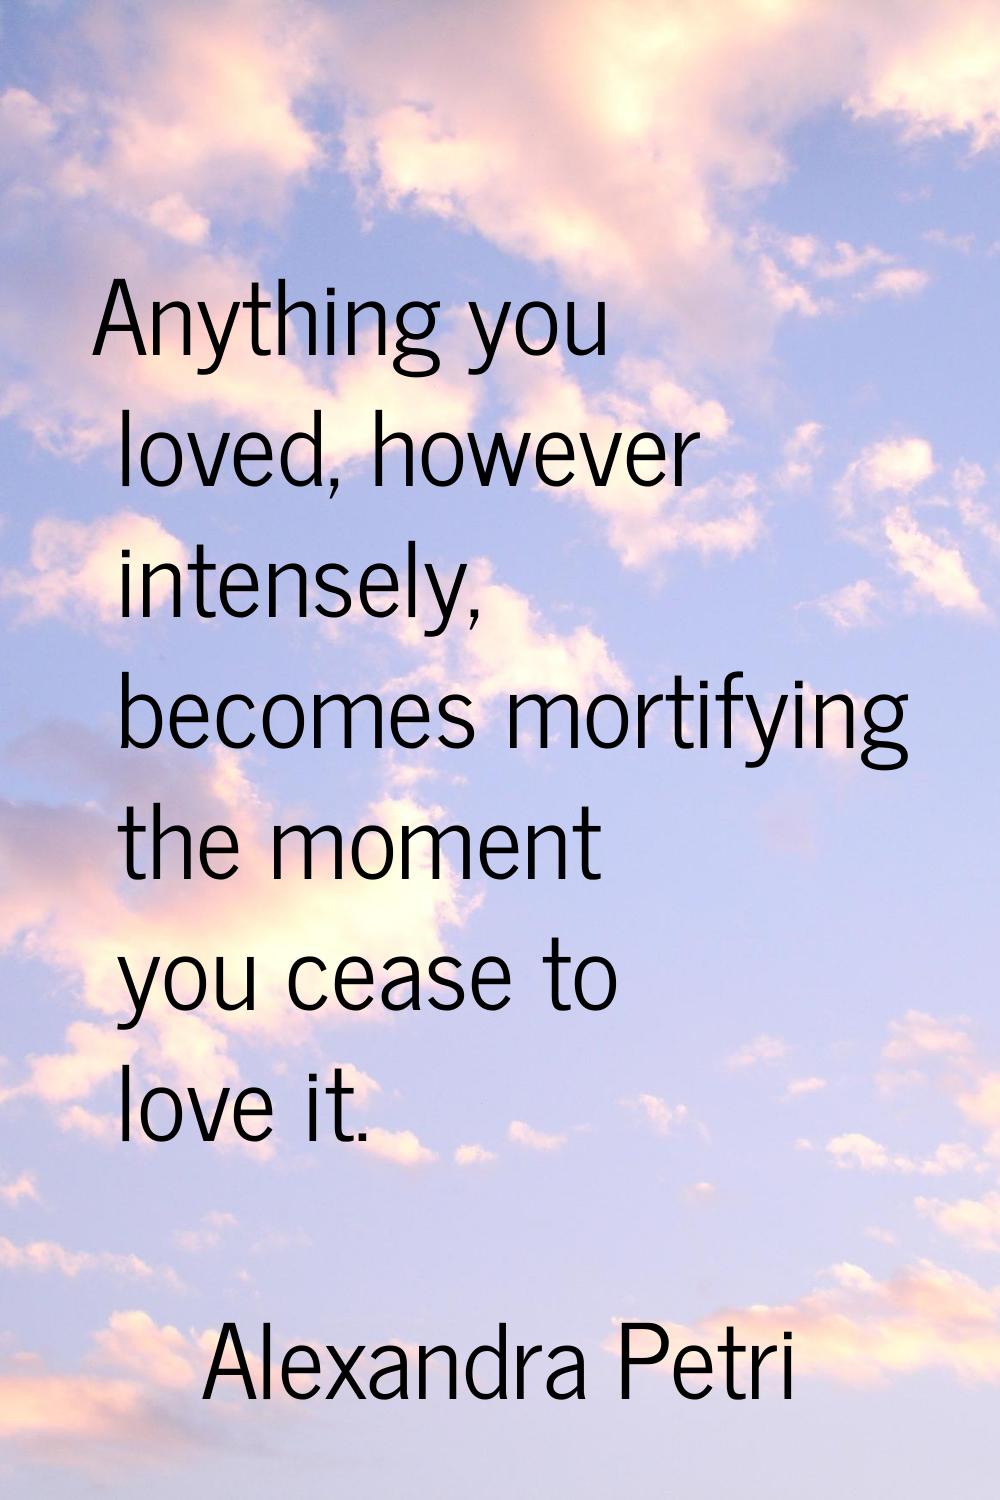 Anything you loved, however intensely, becomes mortifying the moment you cease to love it.